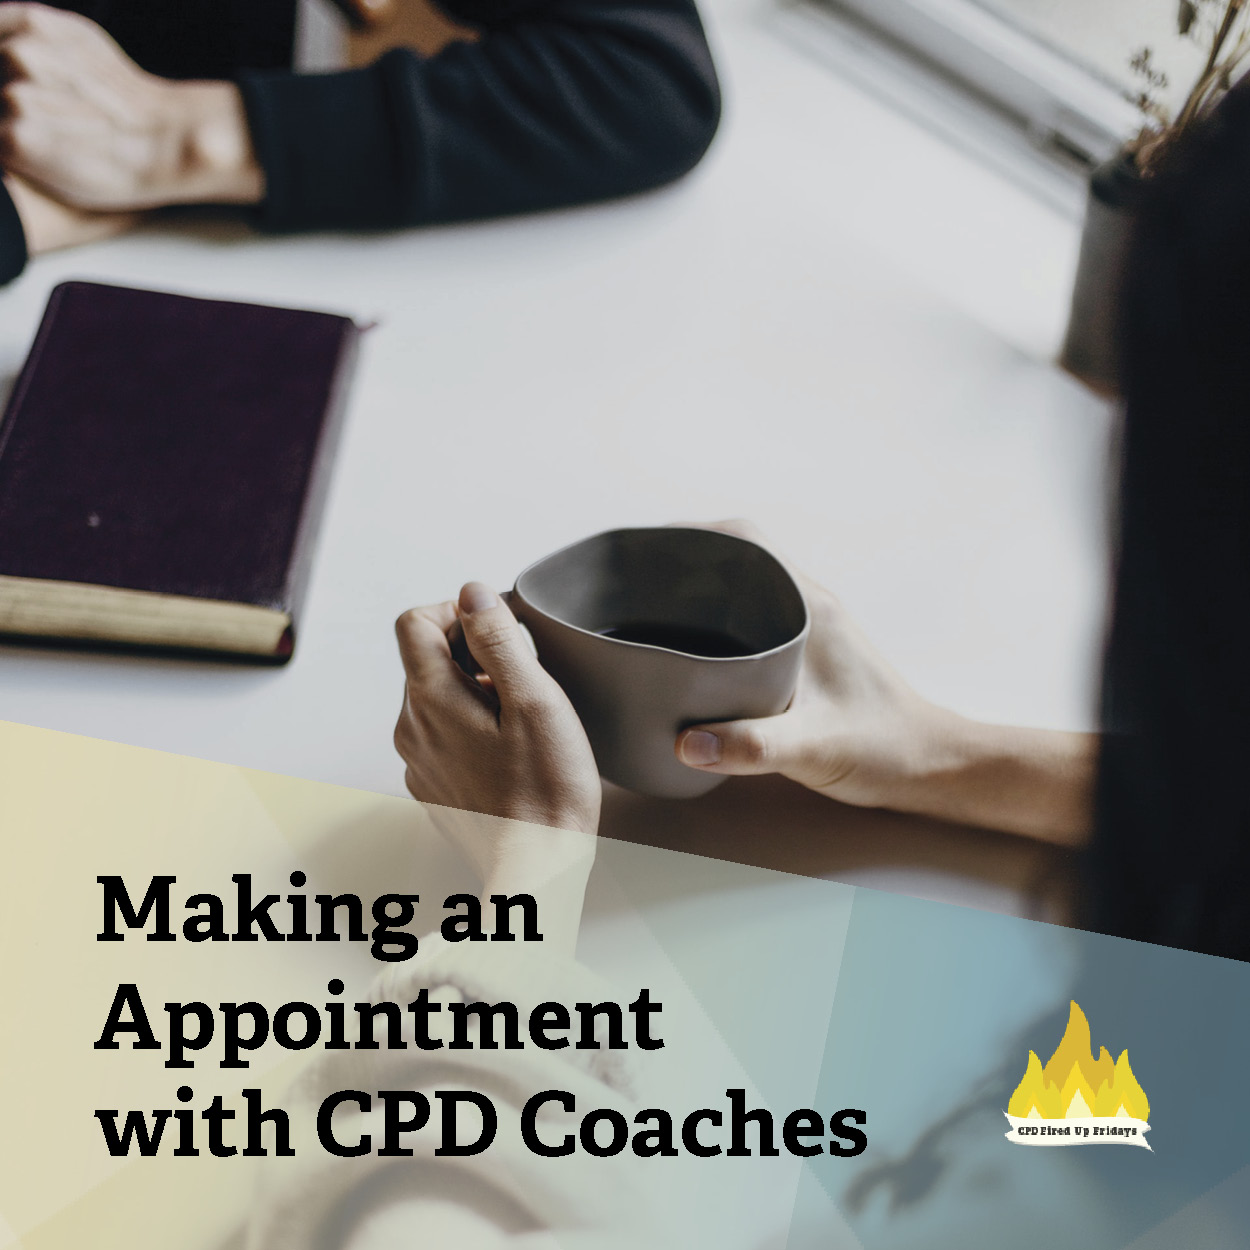 Seen from a just above, two people just off camera sit opposite of each other at a white table. One person's hands are calmly clasped on the table, and the other person's hand wraps around a coffee cup. Text underneath the image reads: 'Making an Appointment with CPD Coaches.'